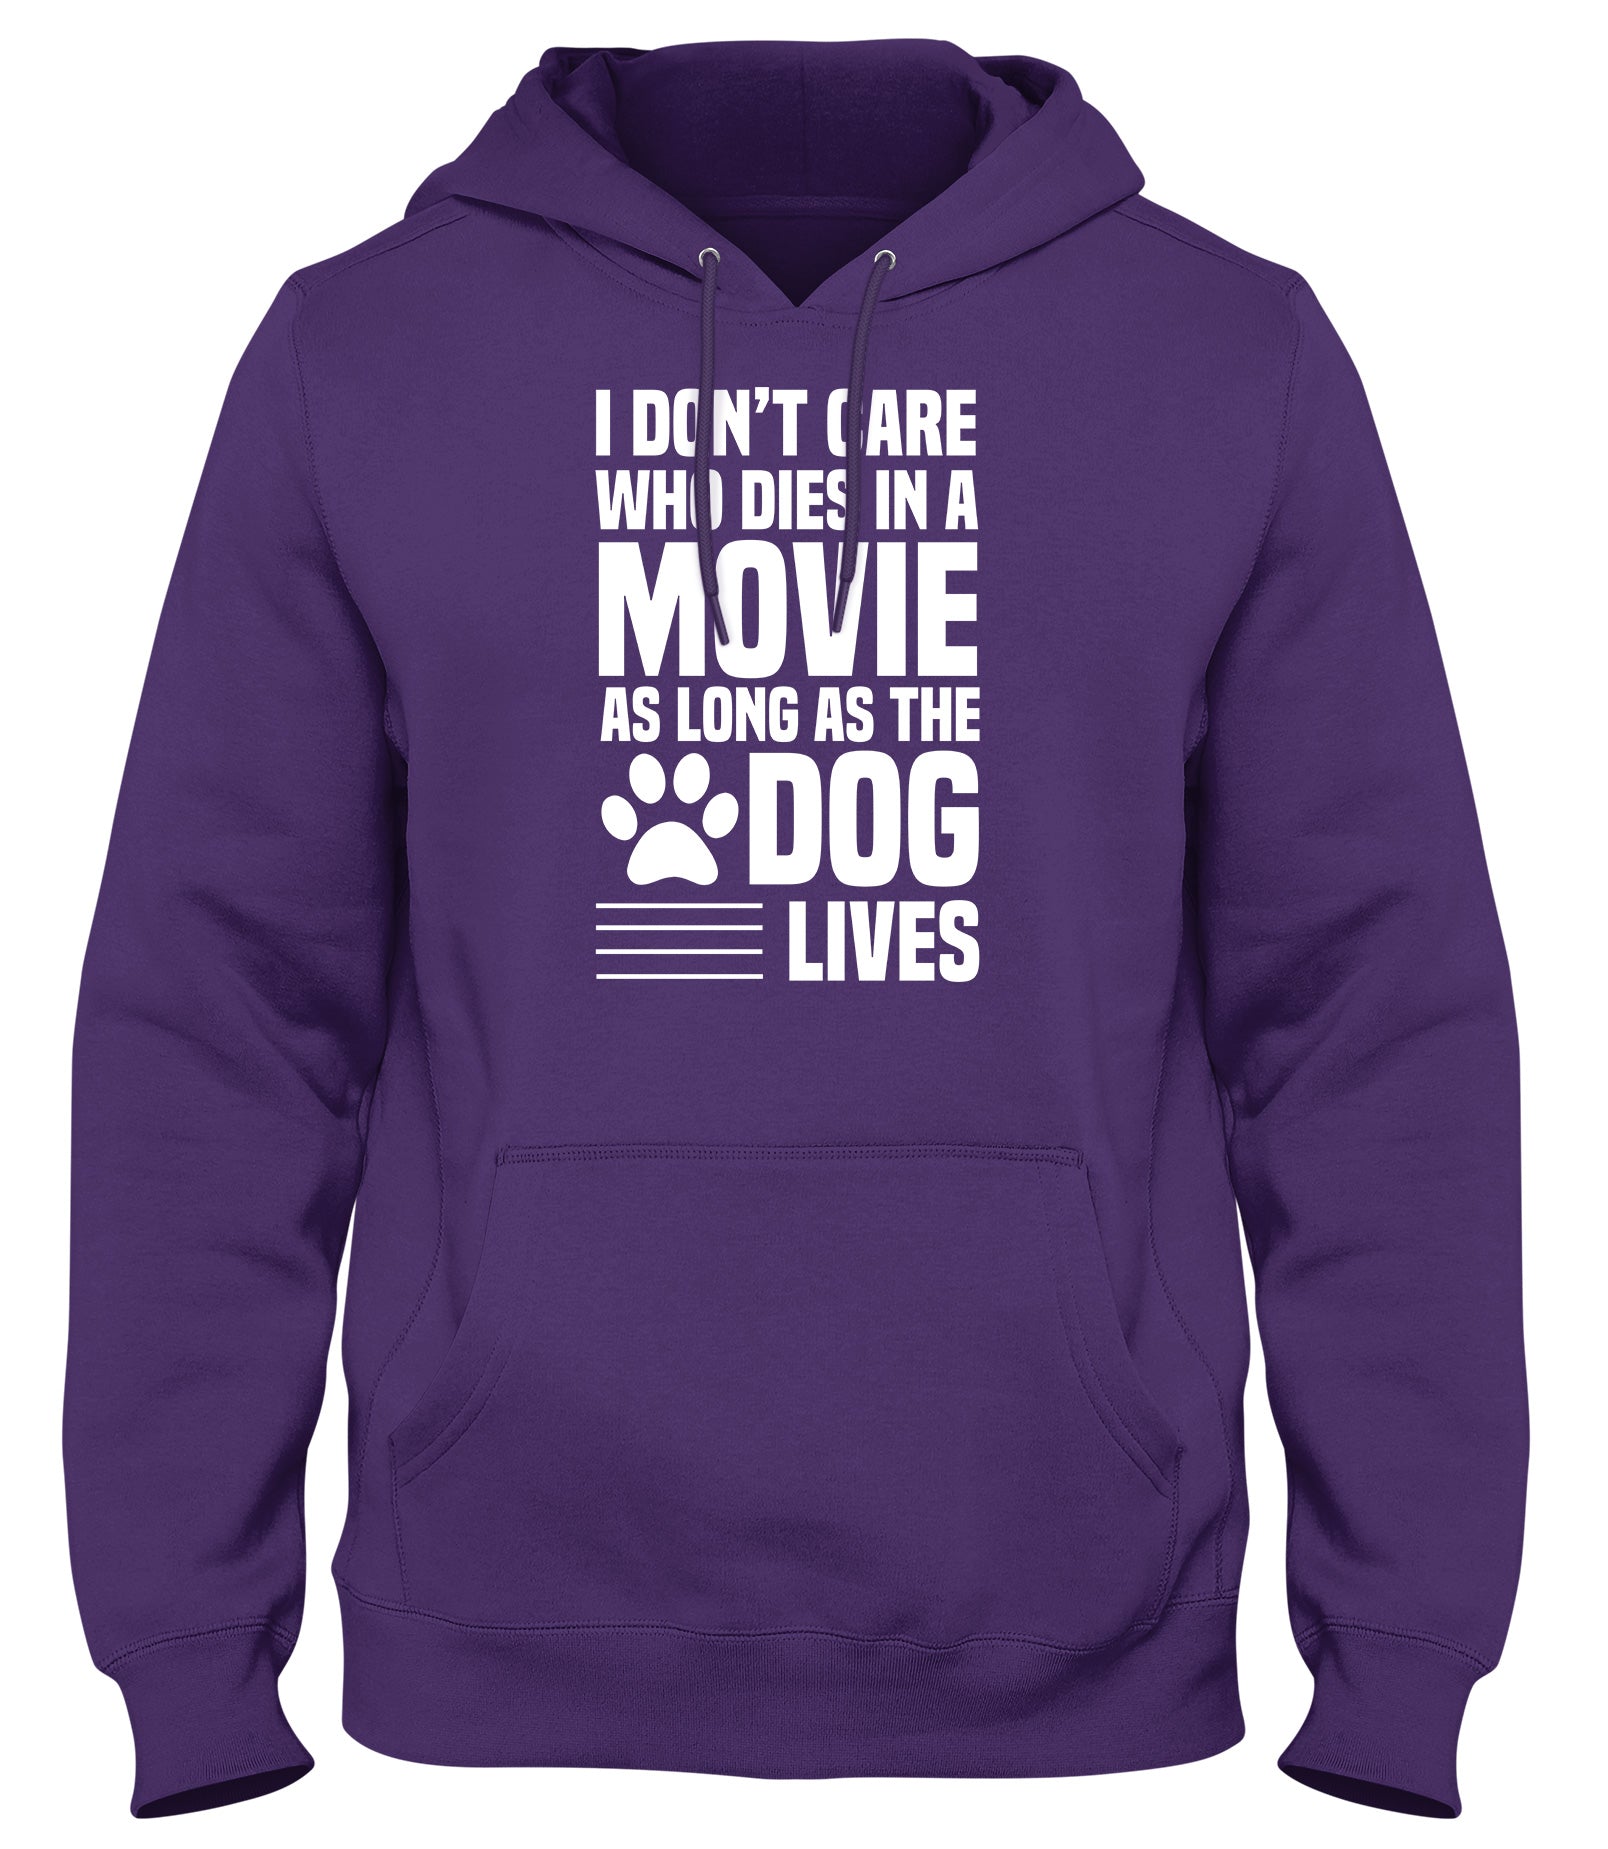 I DON'T CARE WHO DIES IN A MOVIE AS LONG AS THE DOG LIVES MENS WOMENS LADIES UNISEX FUNNY SLOGAN HOODIE